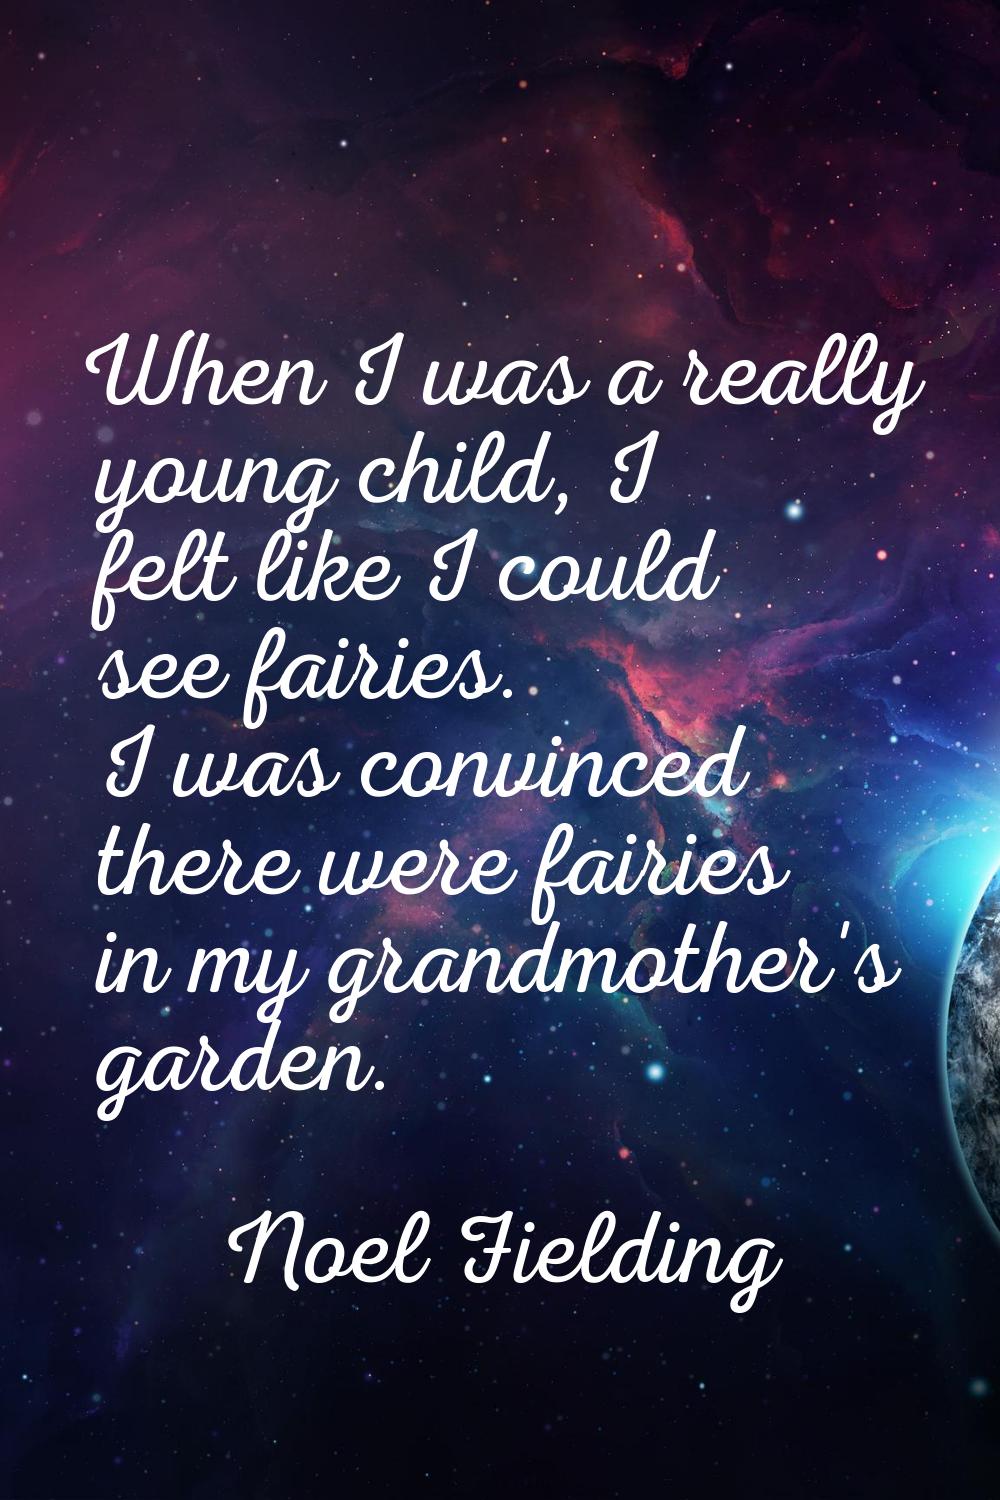 When I was a really young child, I felt like I could see fairies. I was convinced there were fairie